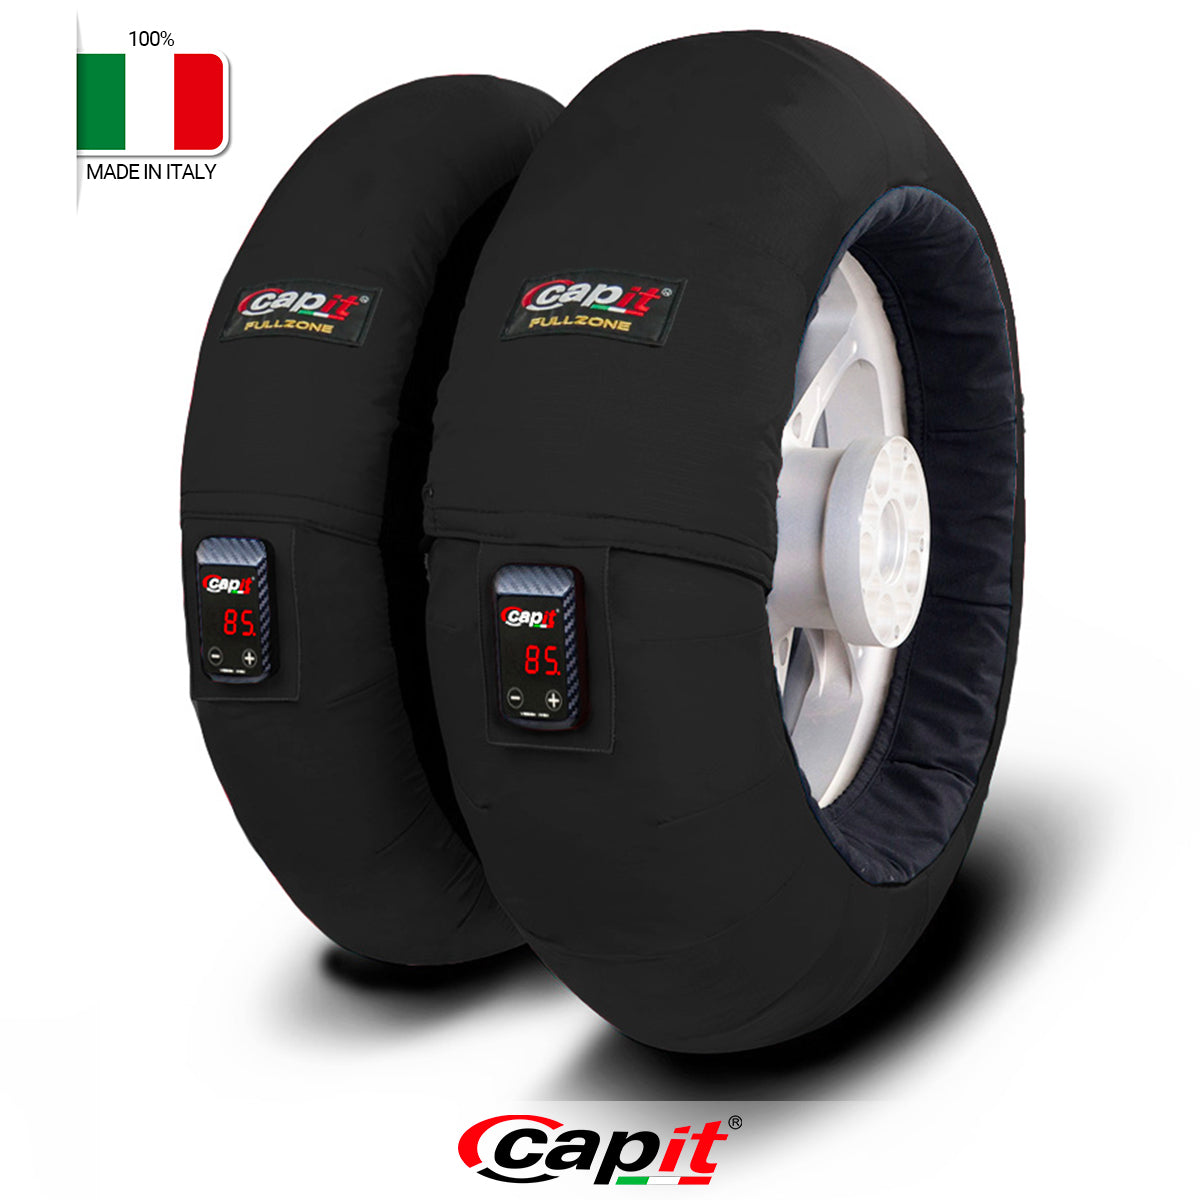 Capit Full ZONE motorcycle Tire warmers